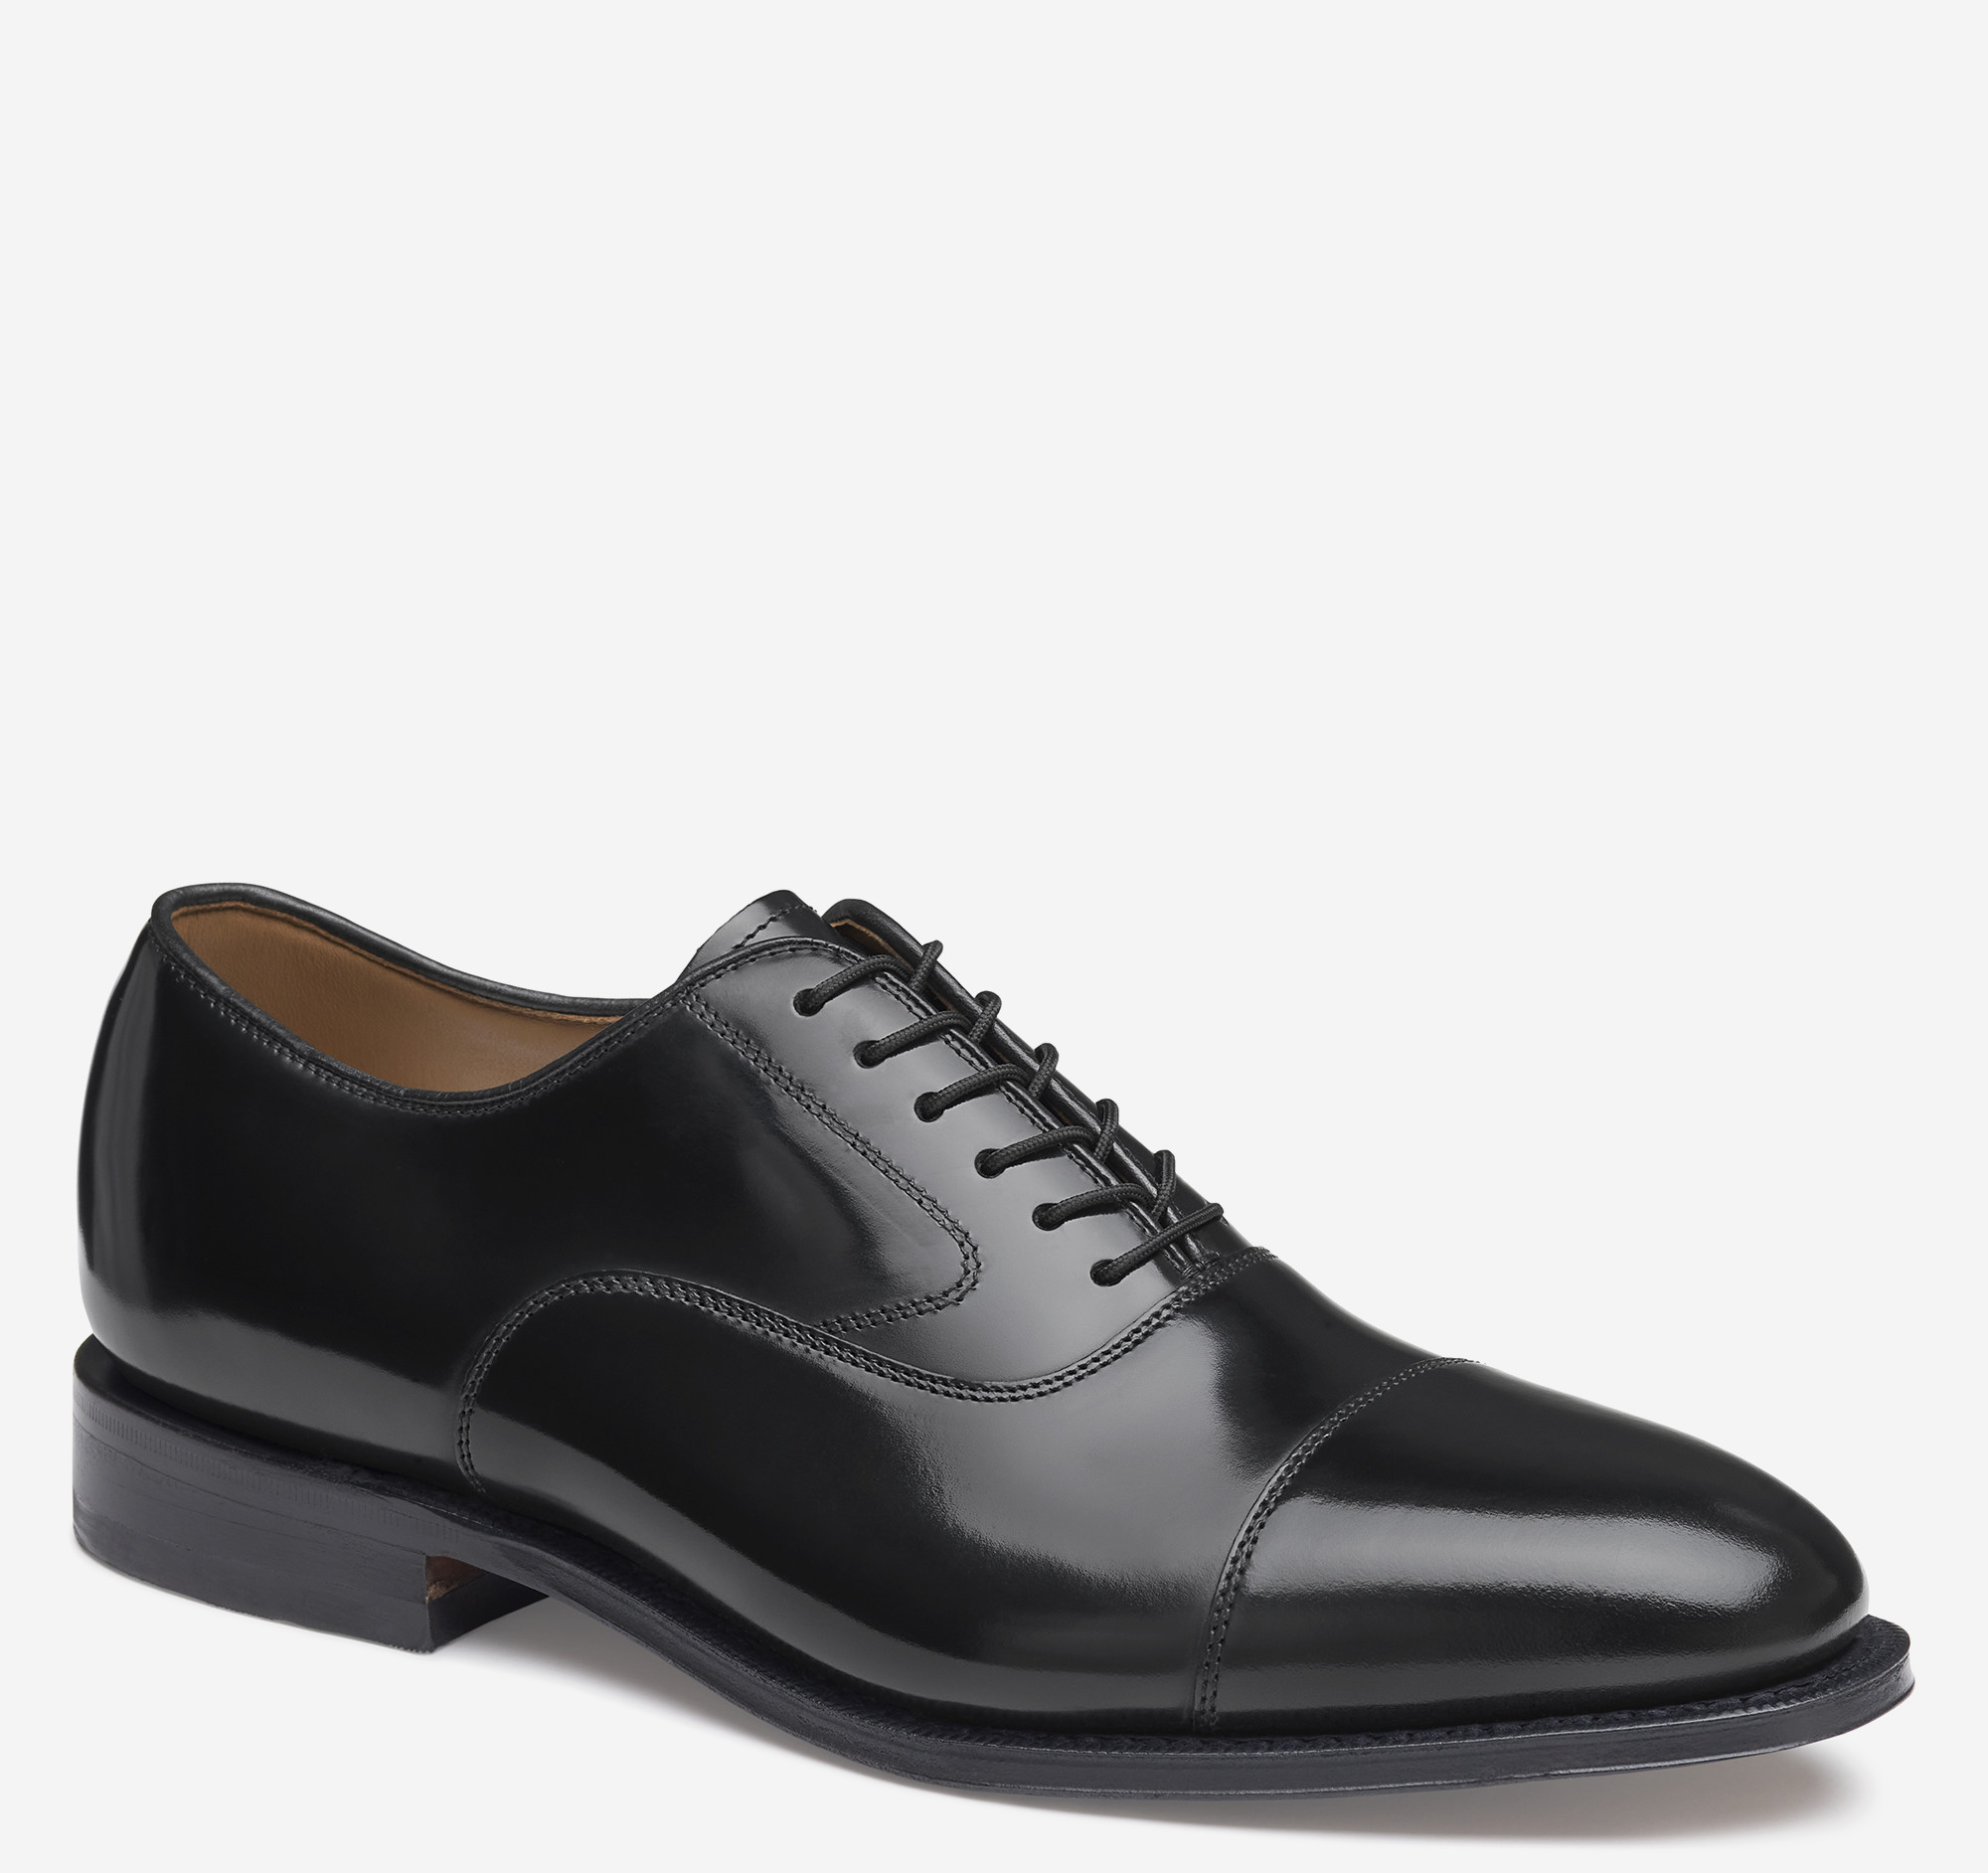 What are the best formal shoes under 1000inr? - Quora